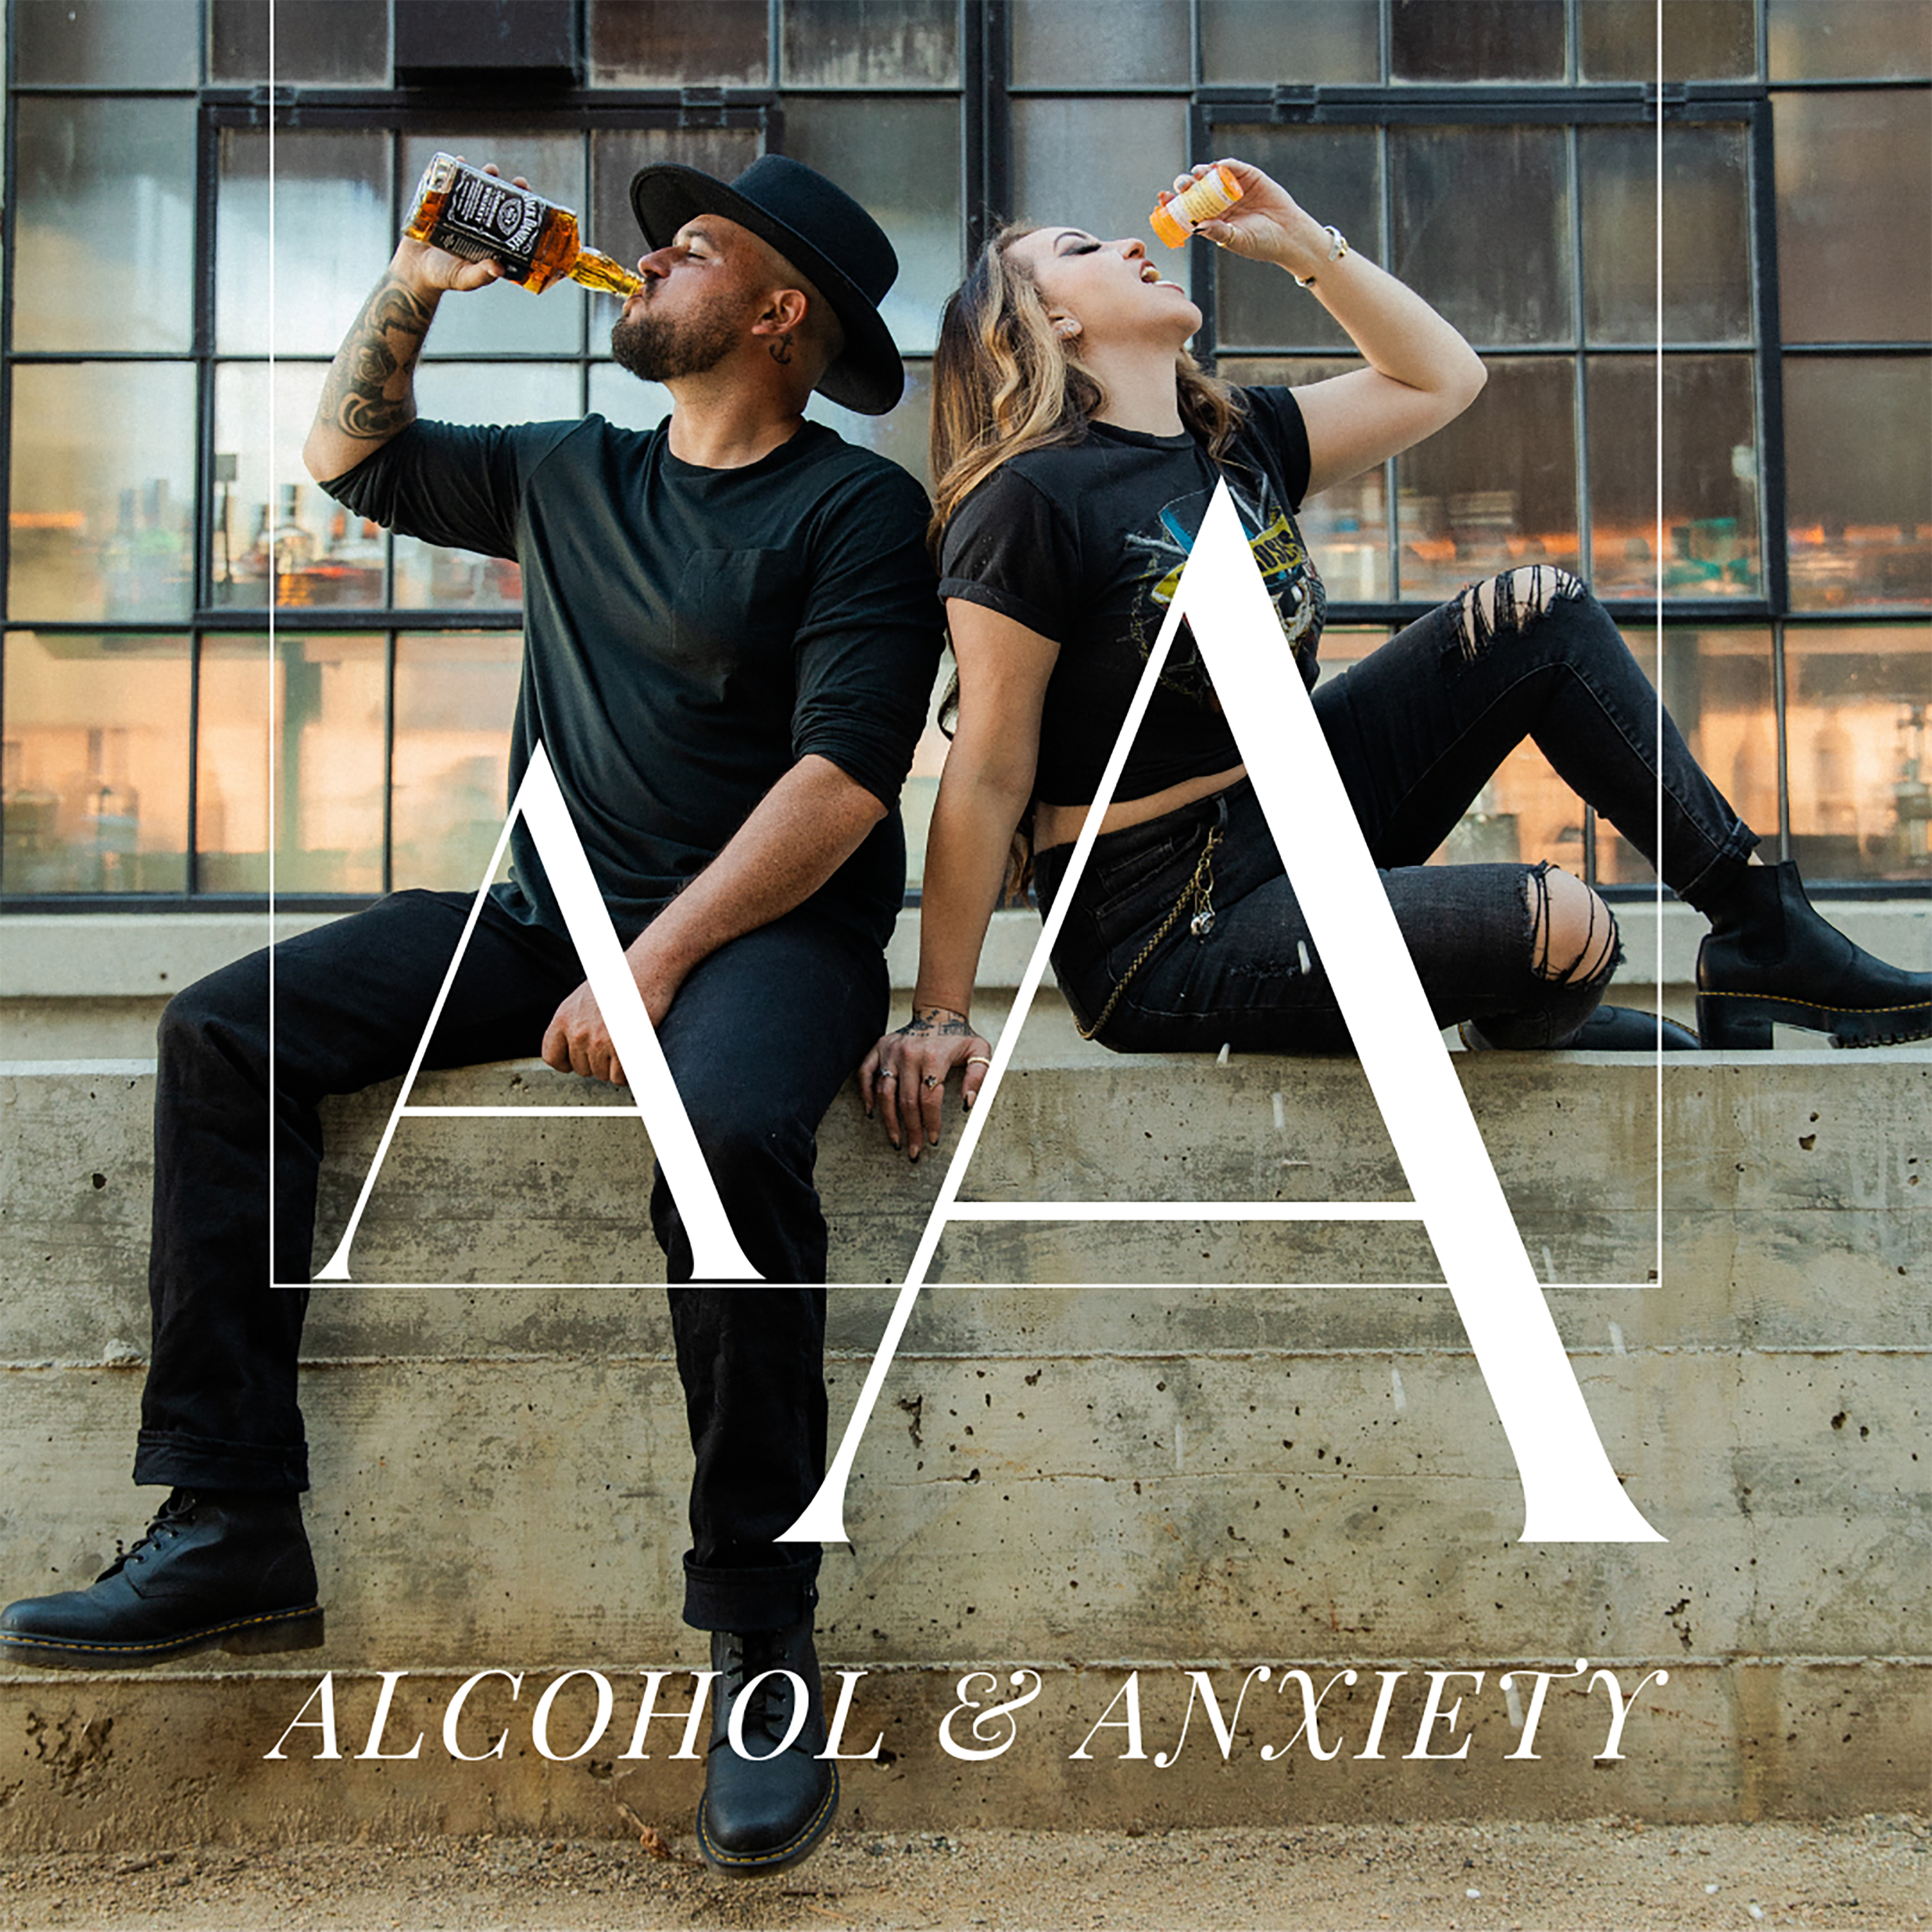 Alcohol & Anxiety